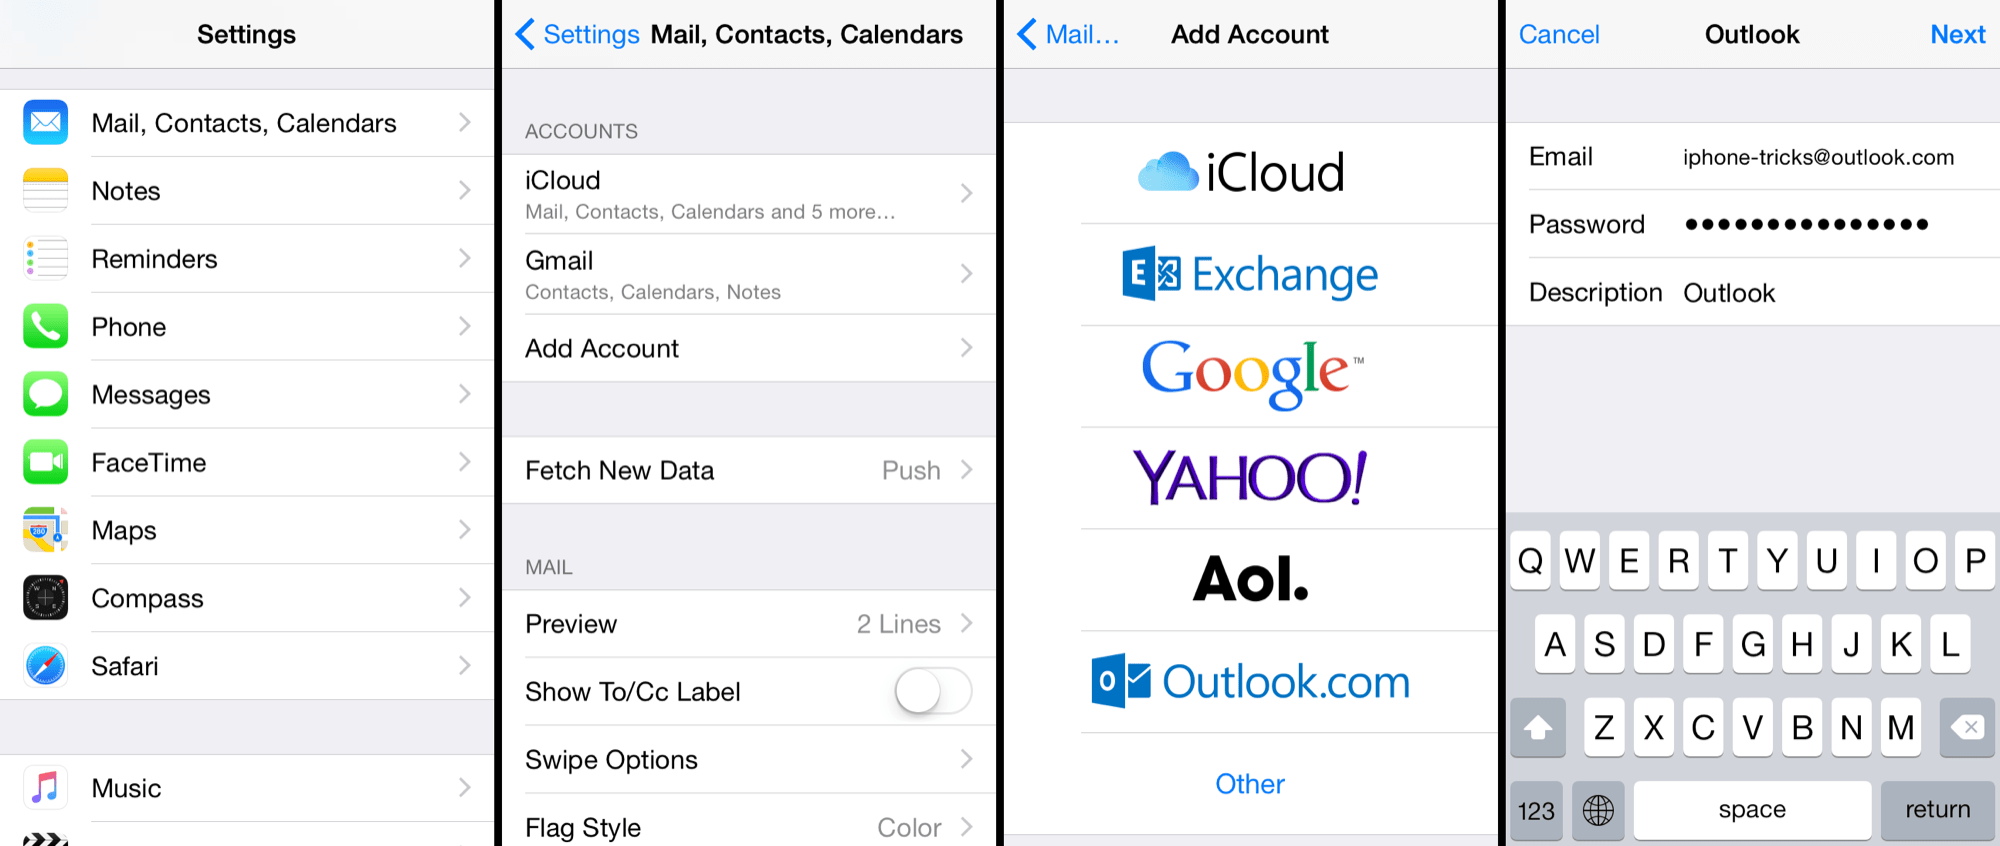 microsoft outlook how to add signature and phone number to email